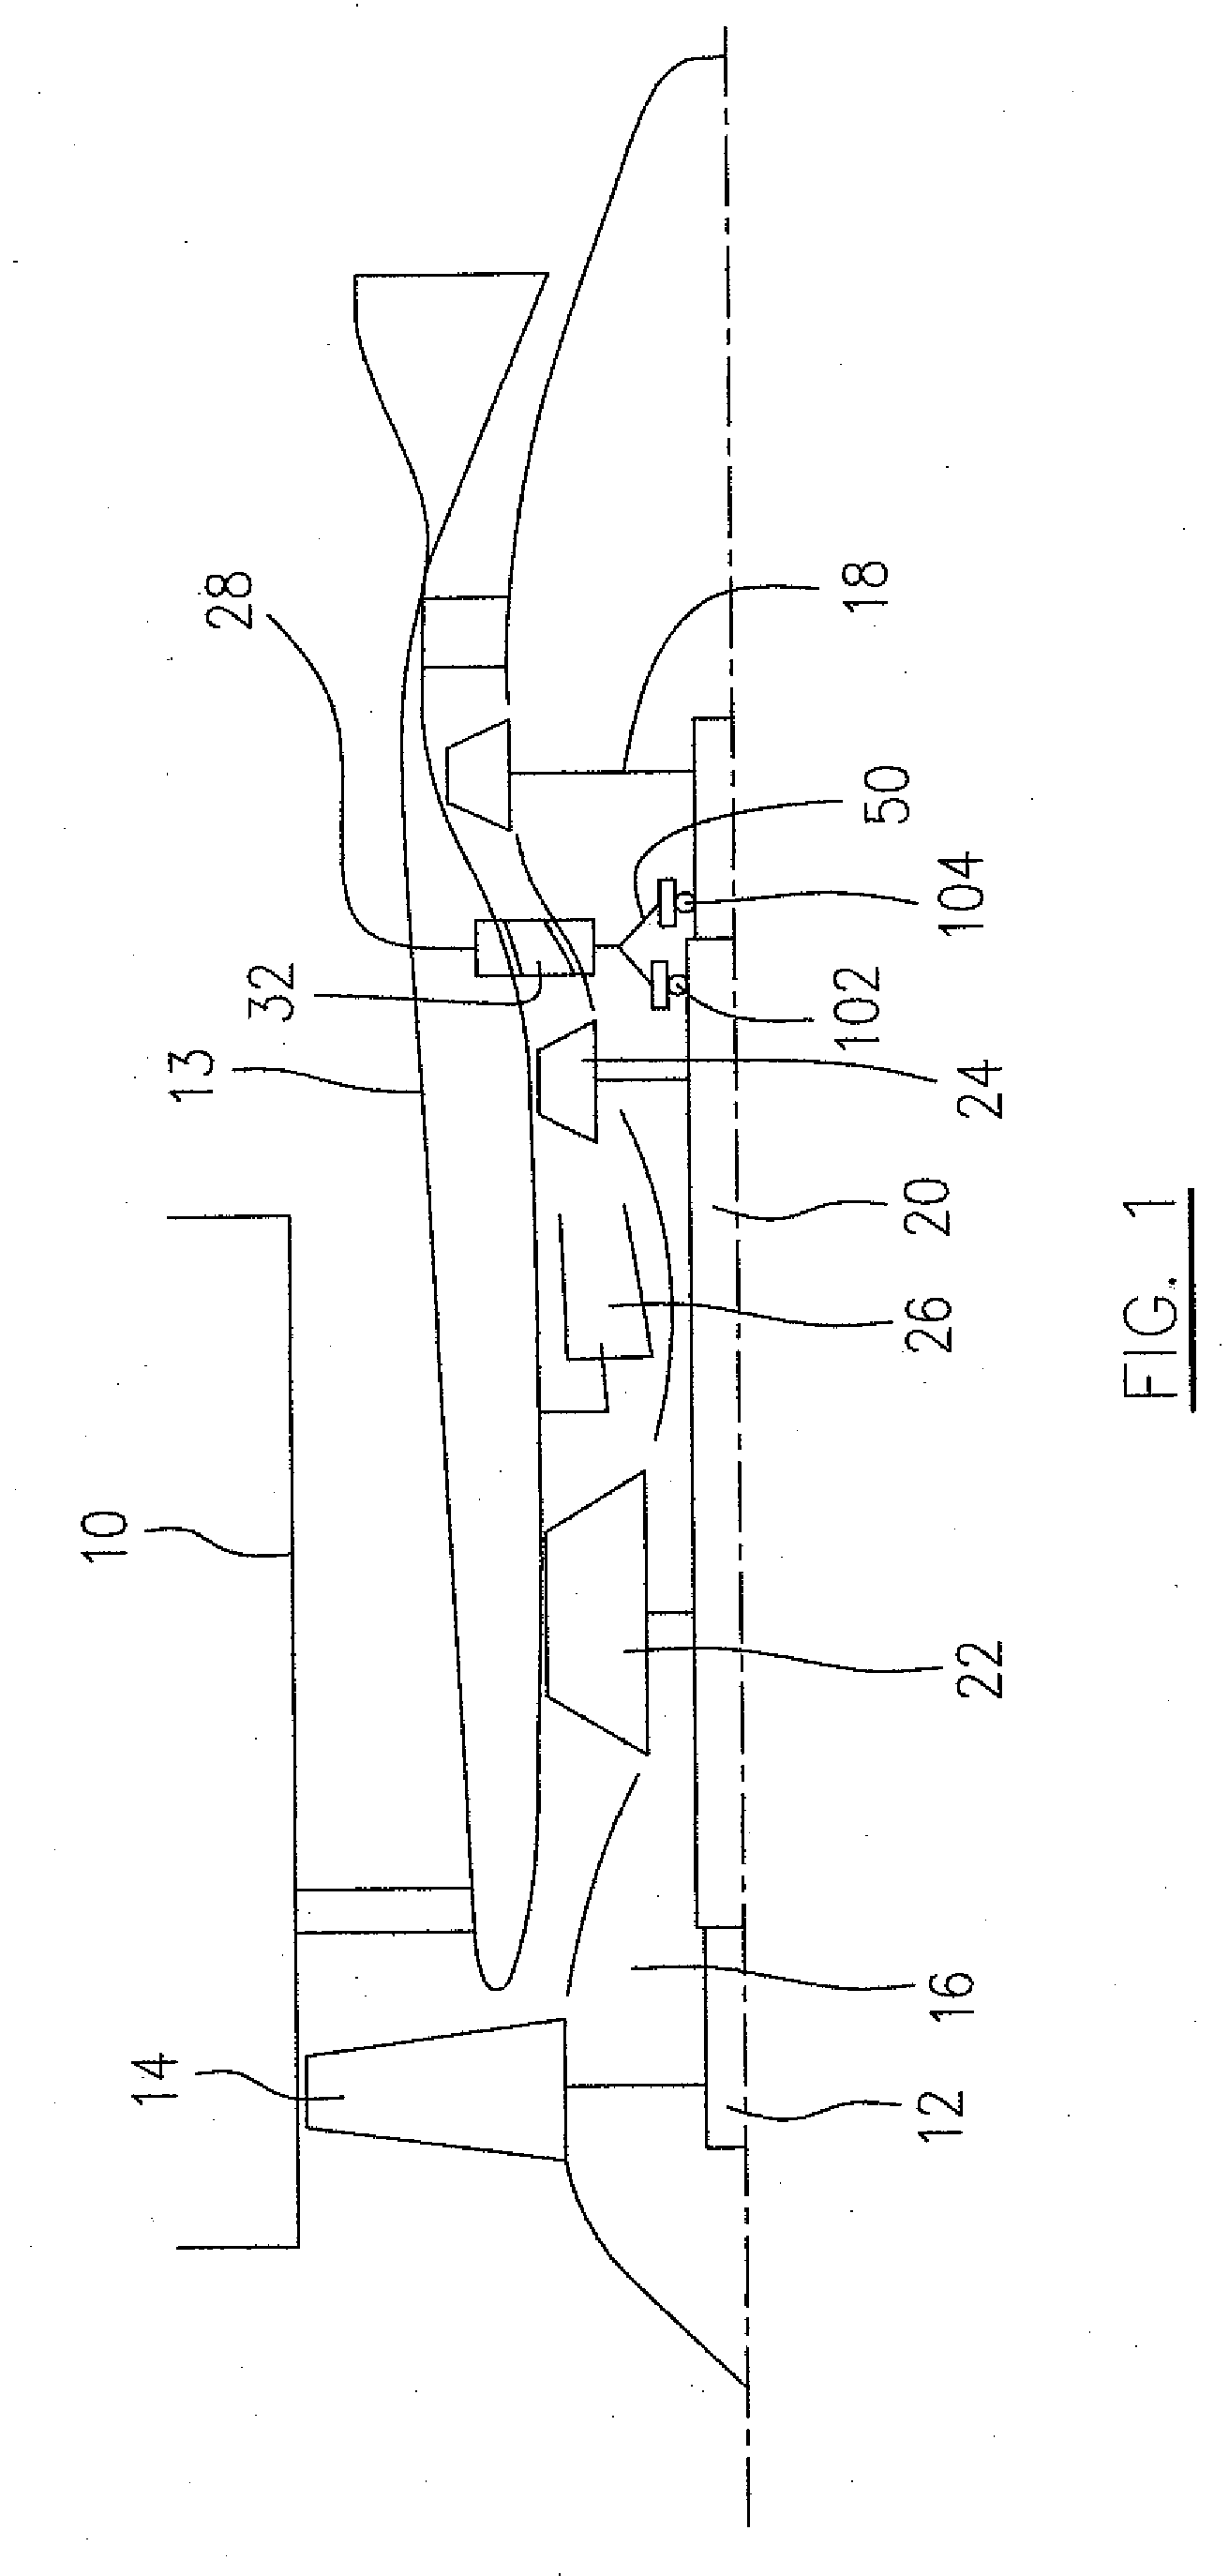 Method for centering engine structures